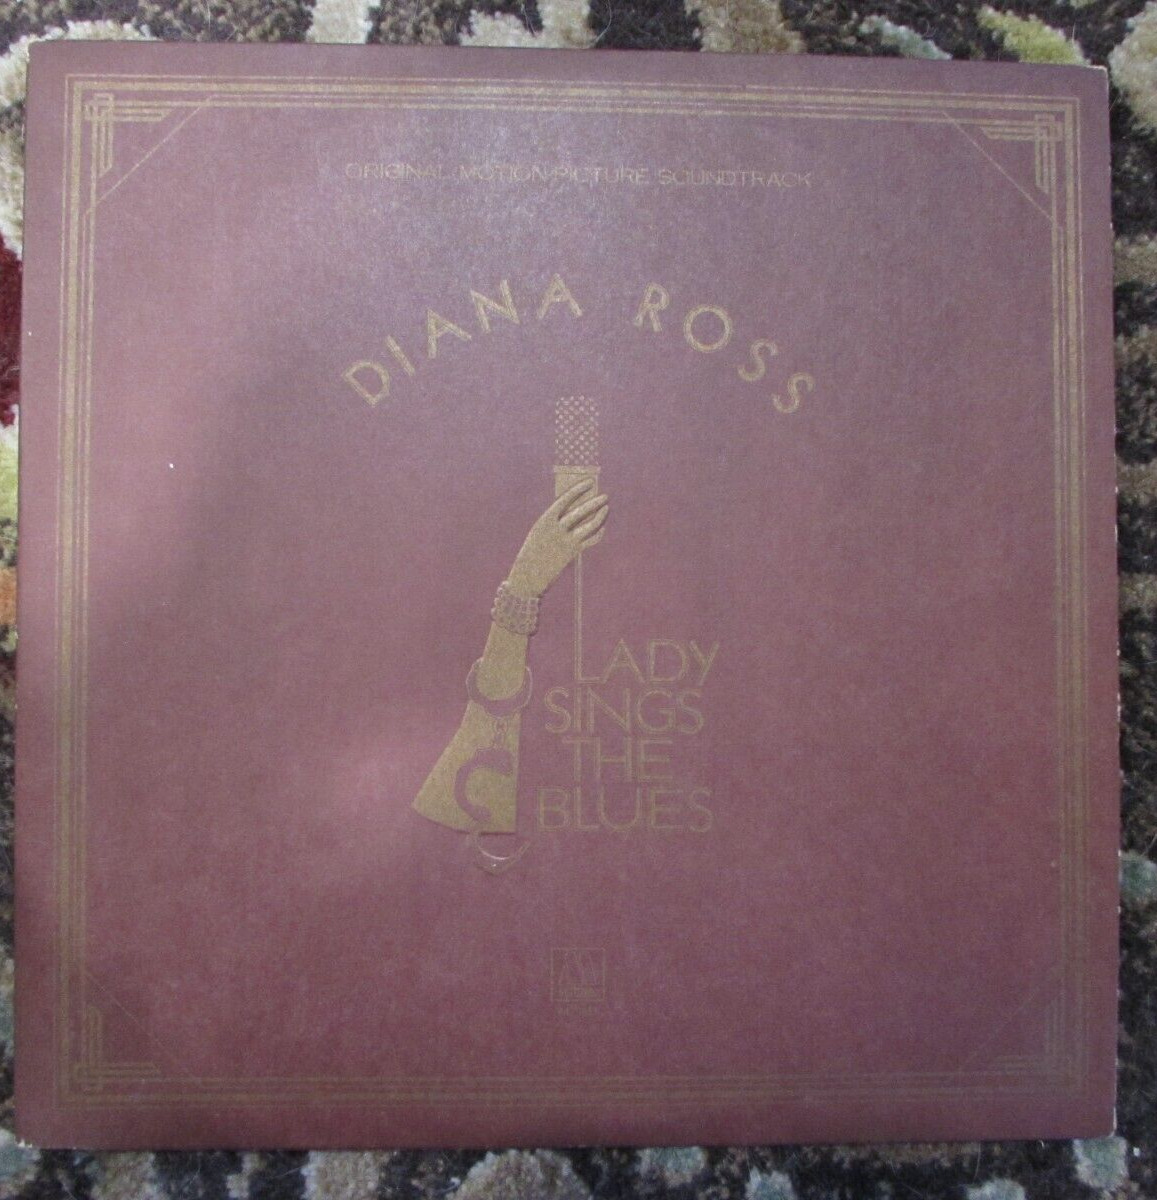 Diana Ross Lady Sings The Blues Soundtrack 2 LP VG+  w/Insert